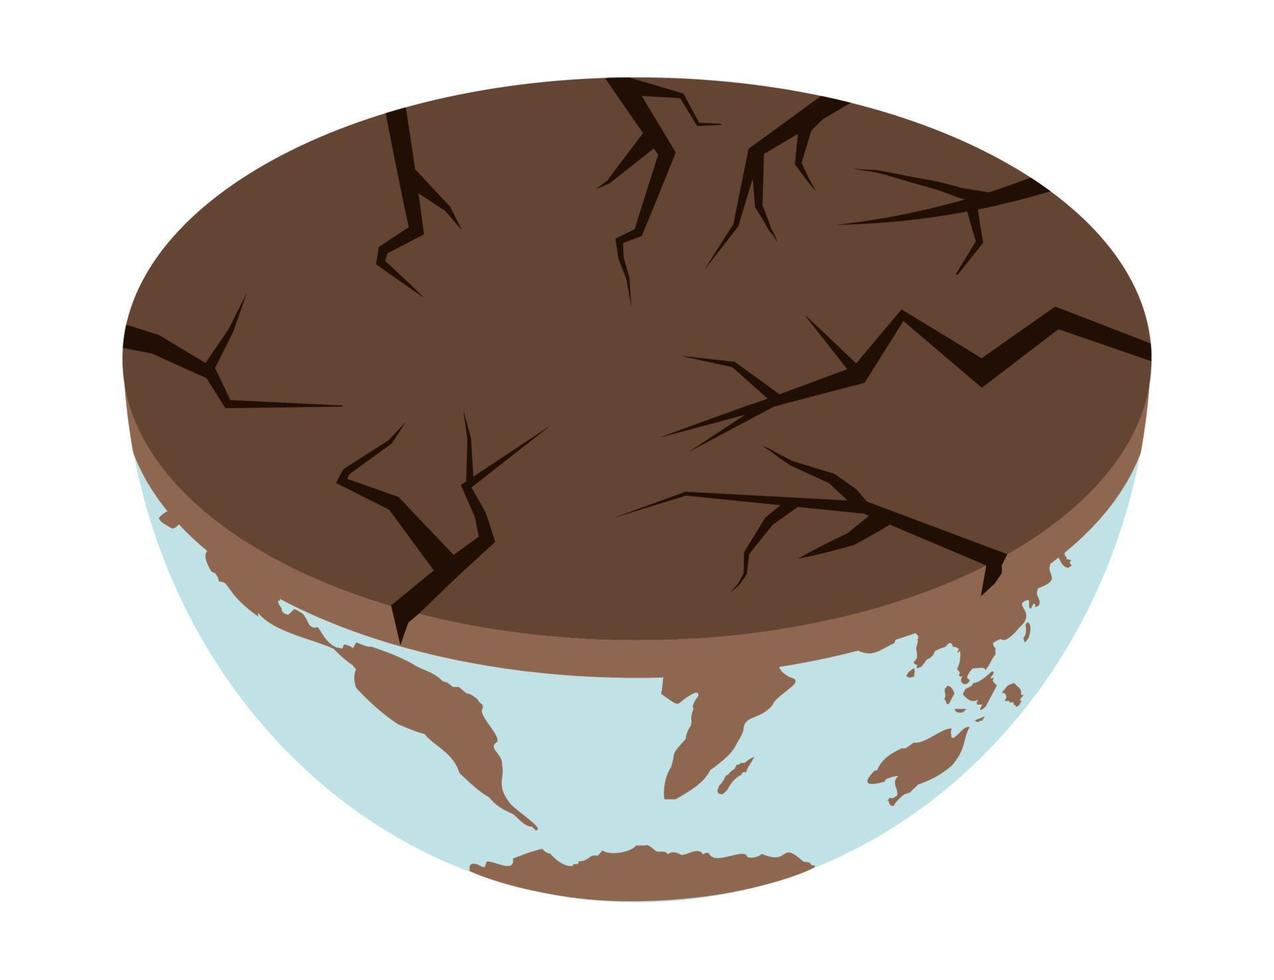 Earth climate change icon - vector isometric ecology illustration of an environmental concept to save the planet Earth. Concept vision on the theme of global crisis in the world.